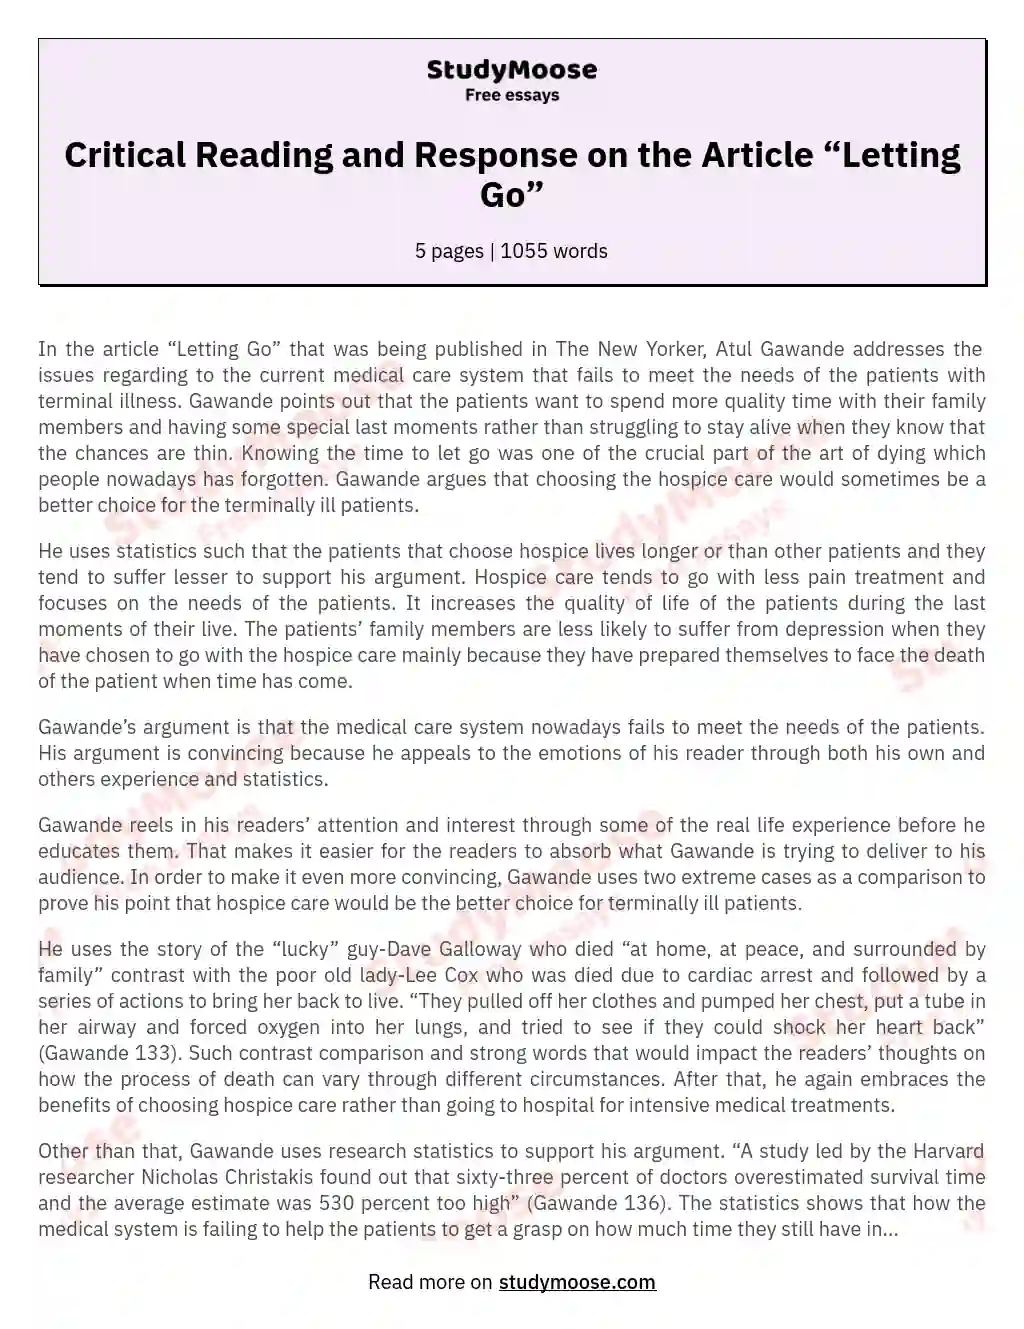 Critical Reading and Response on the Article “Letting Go” essay